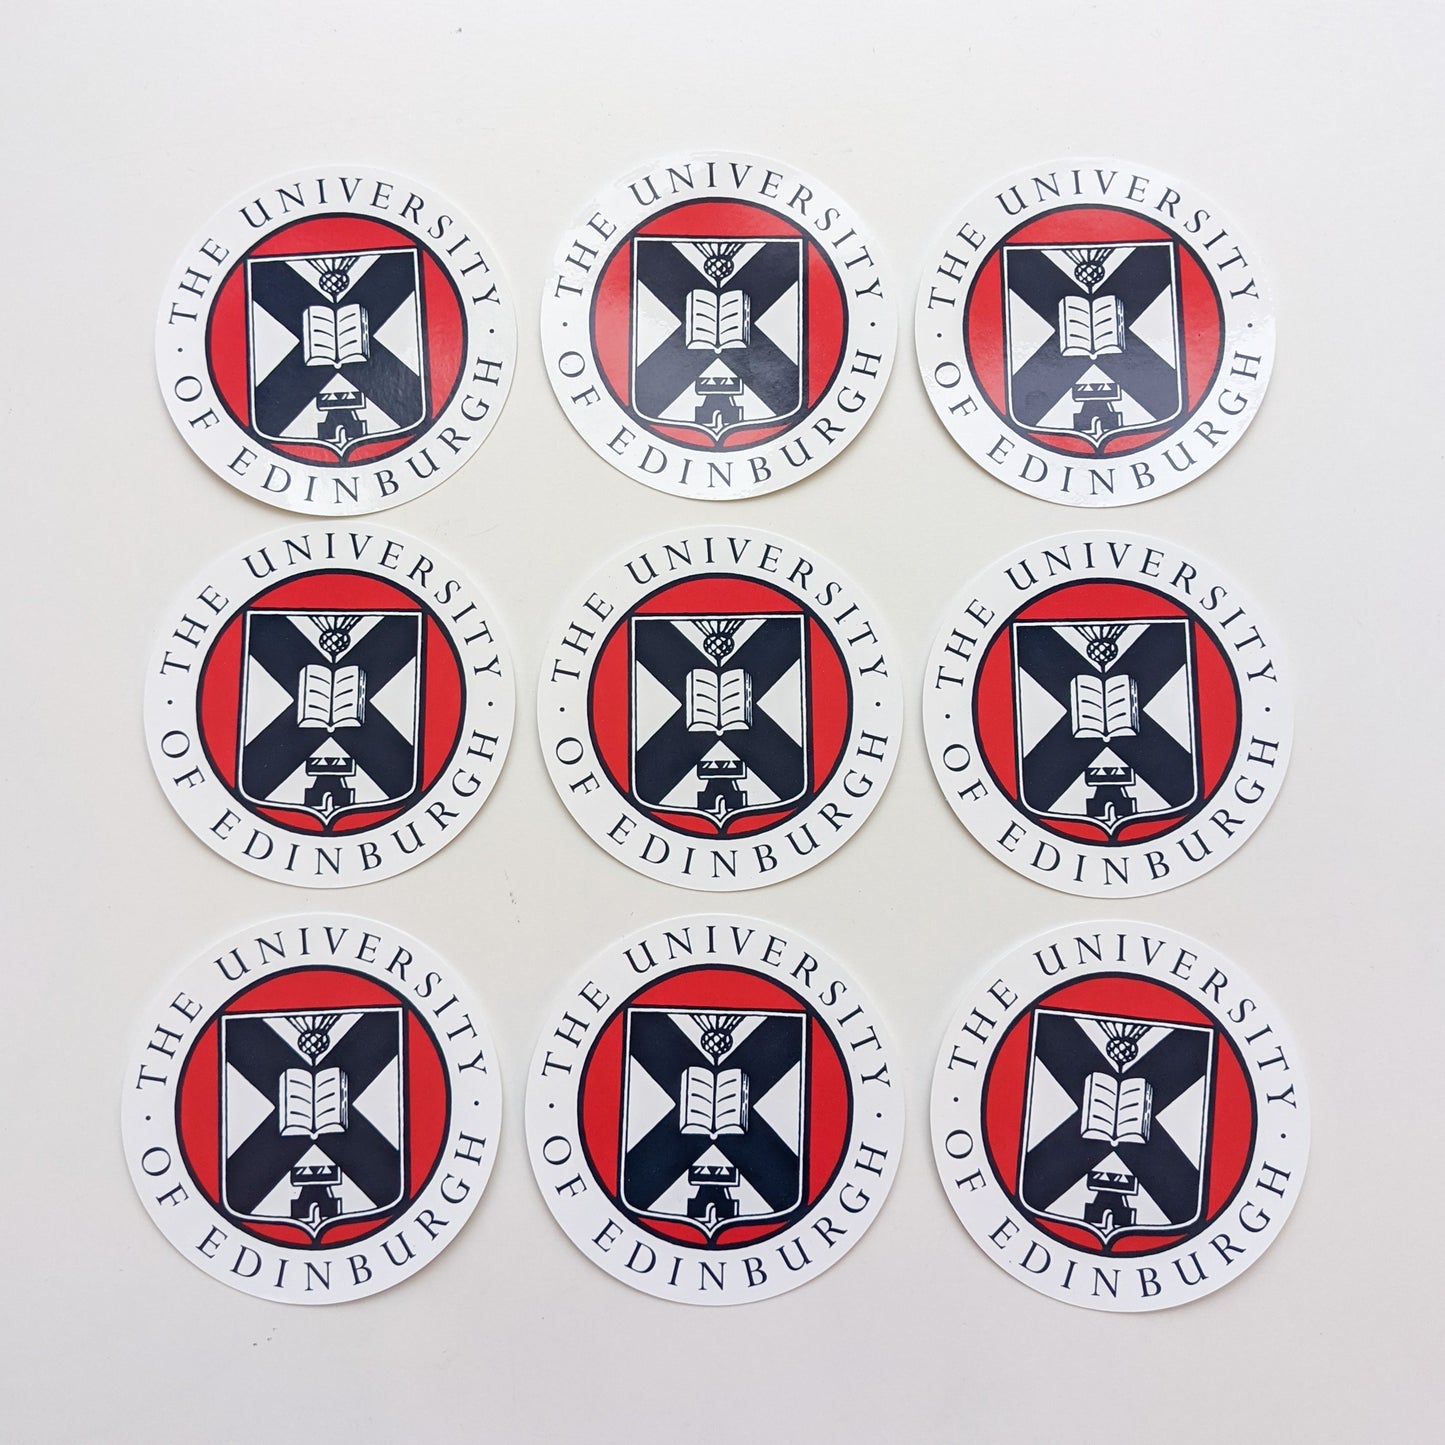 Our Round Window Sticker laid out in a repeating pattern. 